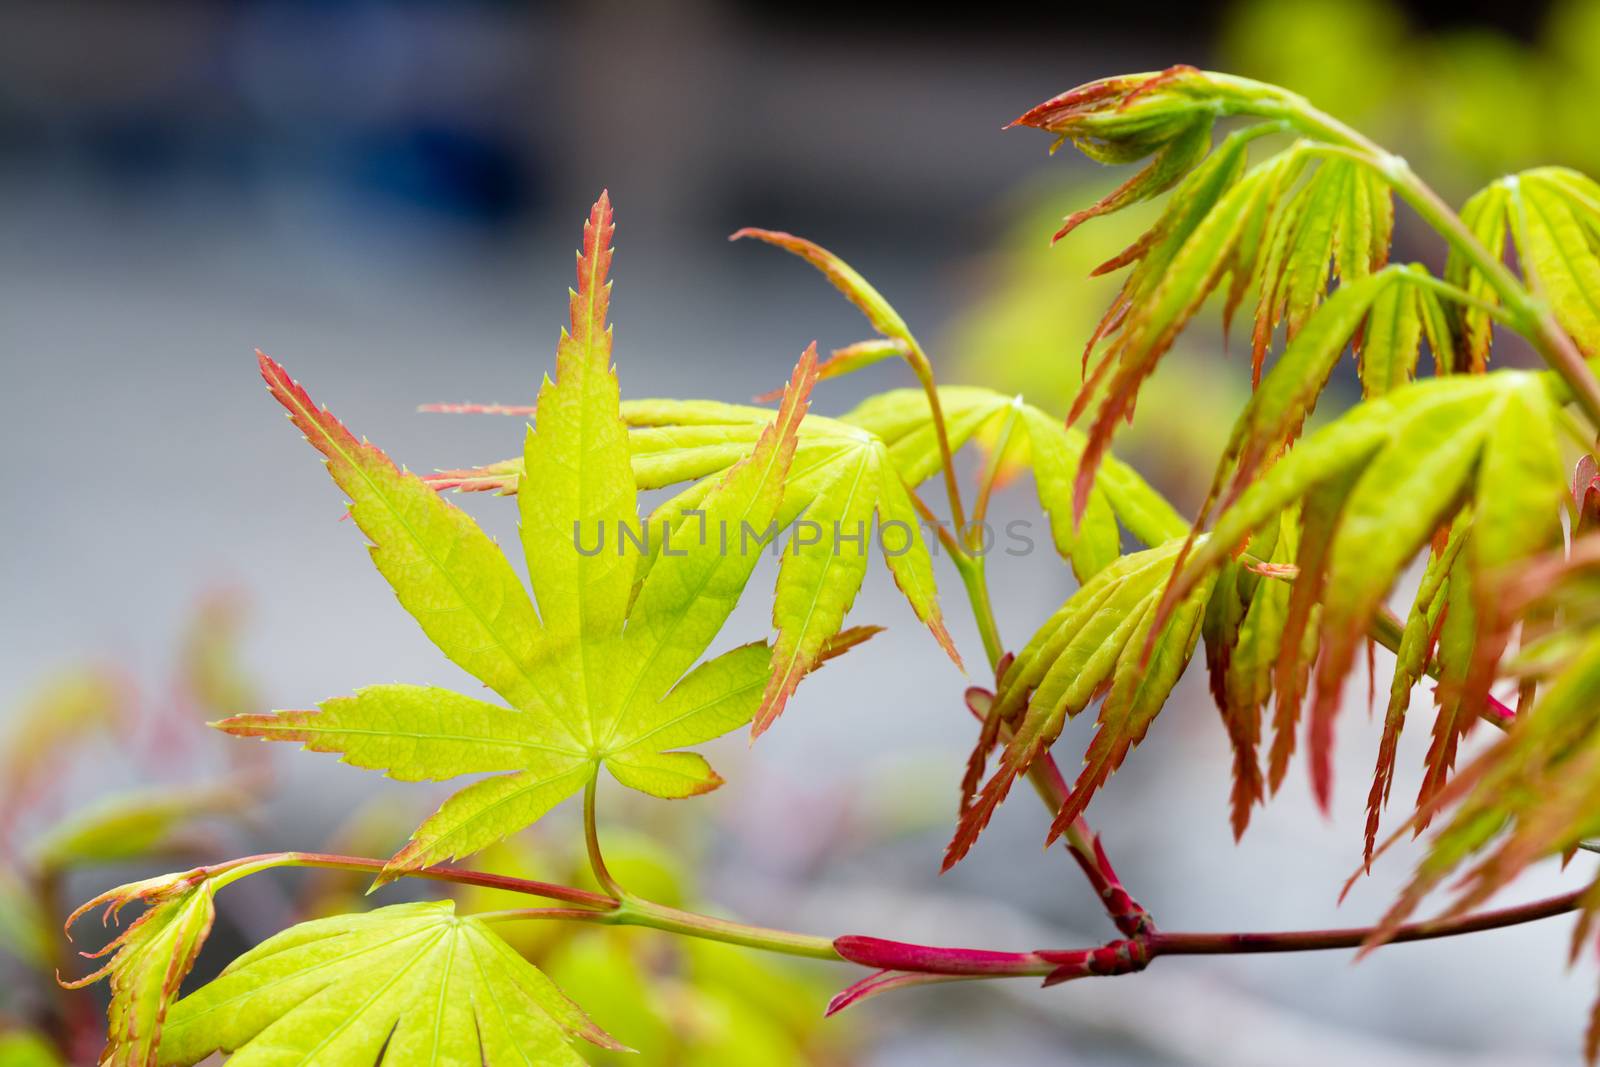 A newly sprouted leaf on a Japanese Maple tree in early spring.